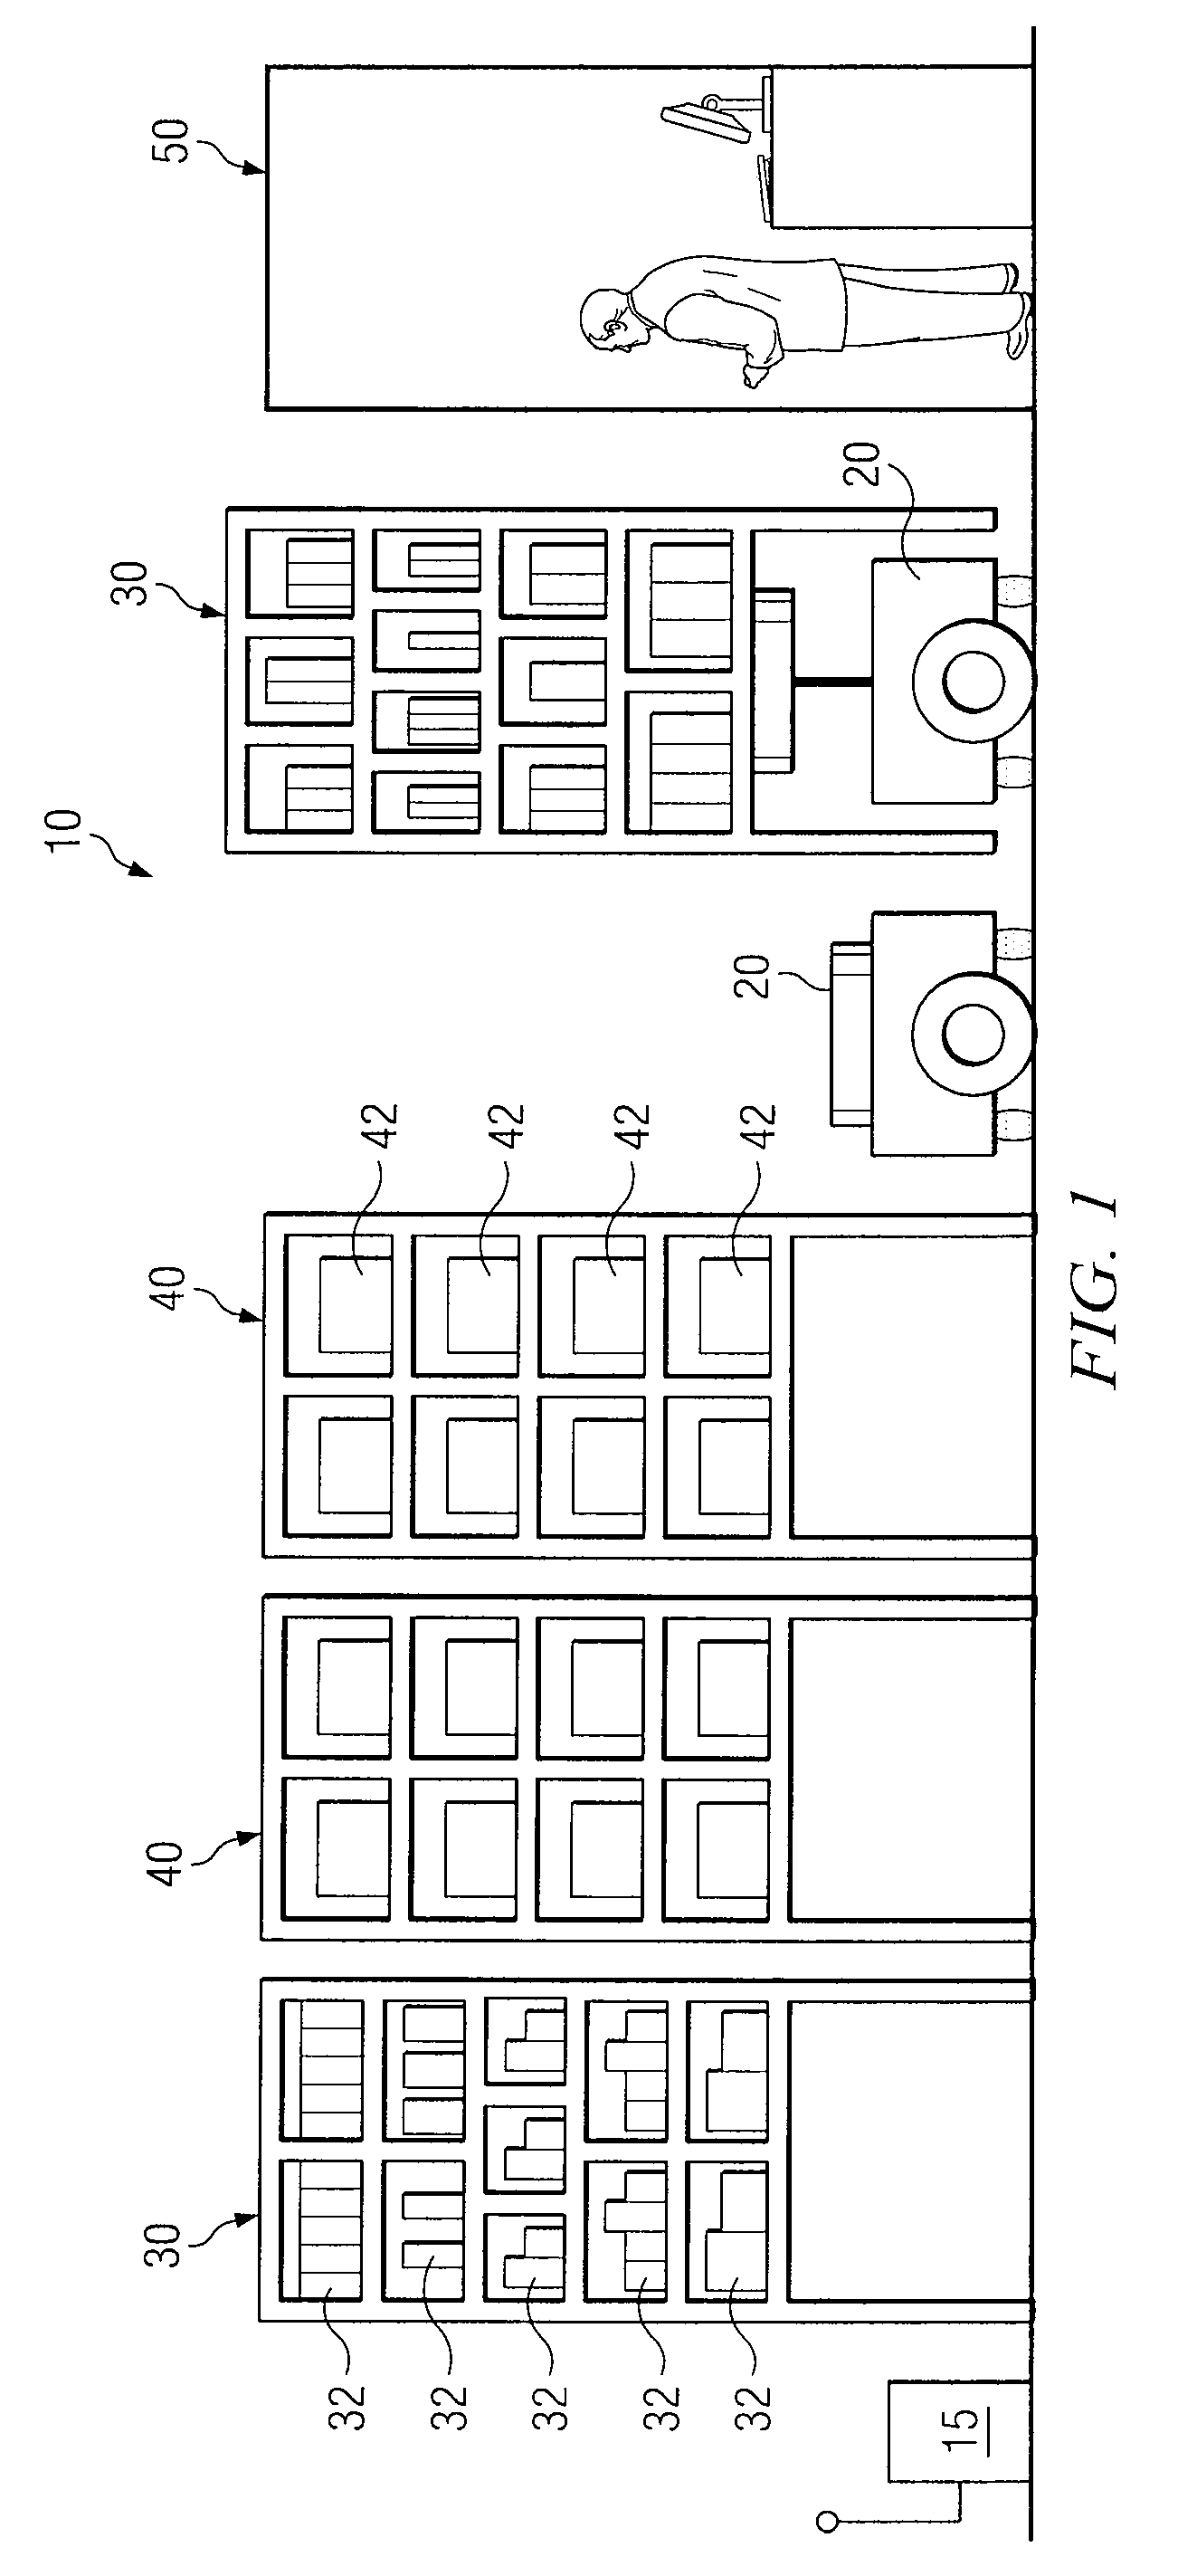 Method and system for fulfilling requests in an inventory system